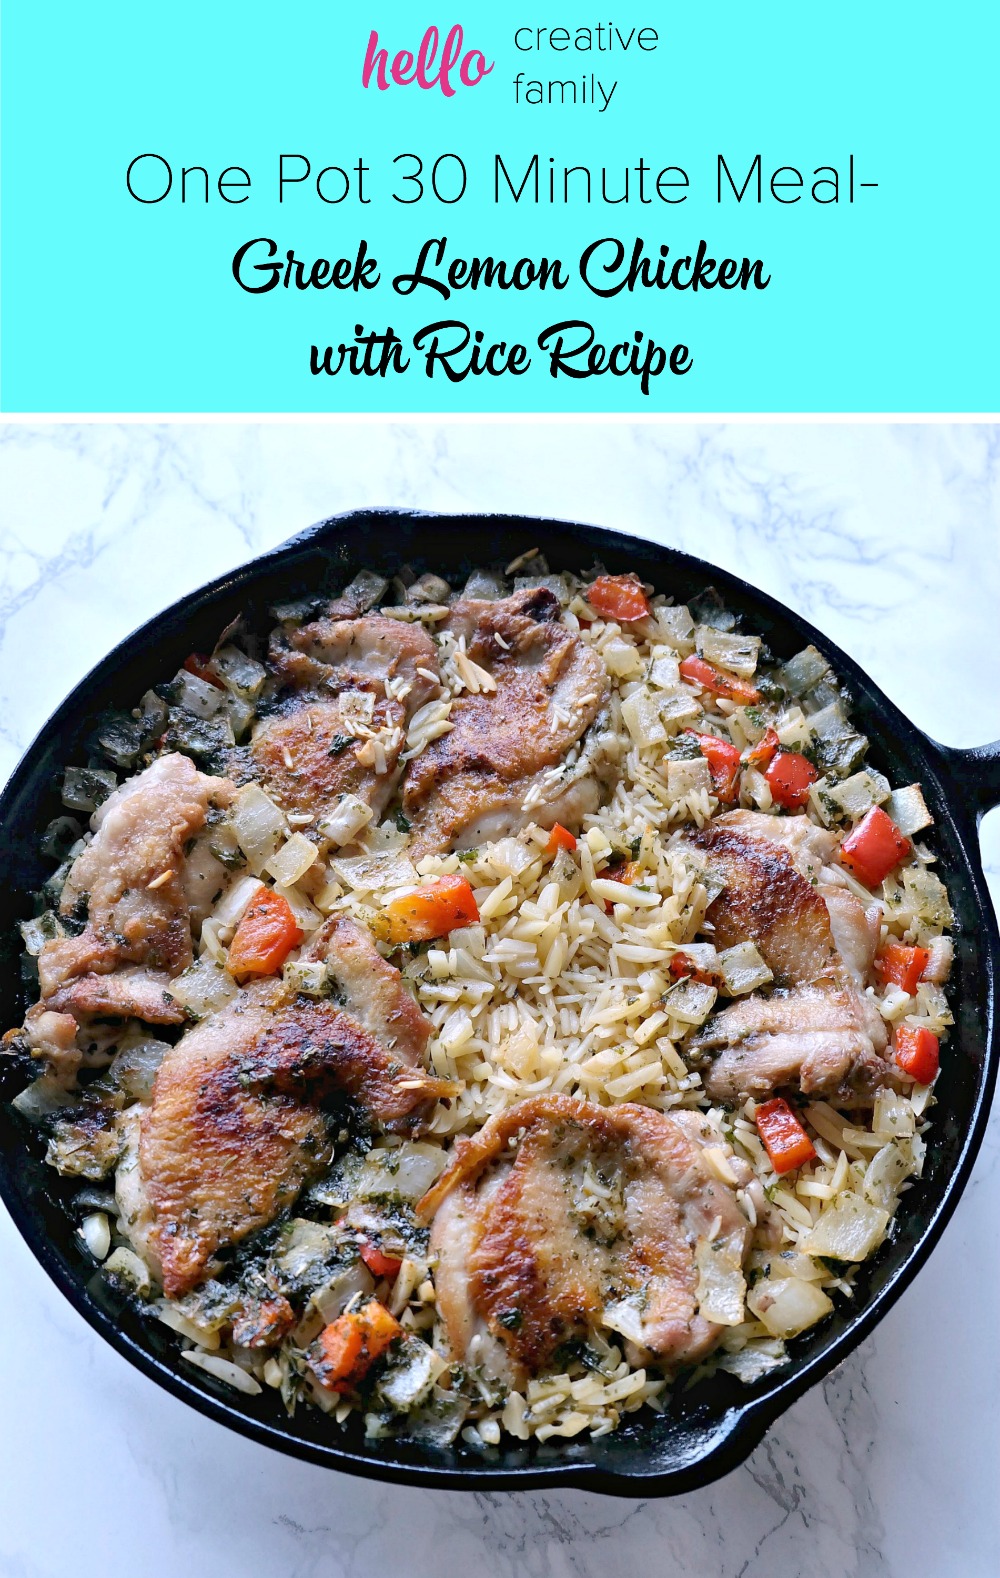 This one pot, 30 minute meal is sure to be a hit for the whole family! Made with deboned chicken thighs, this Greek lemon chicken with rice recipe is a favorite with adults and kids alike! It cooks up in about 20 minutes giving you extra time to put together a delicious side dish. Uses all simple recipes you probably have at home!